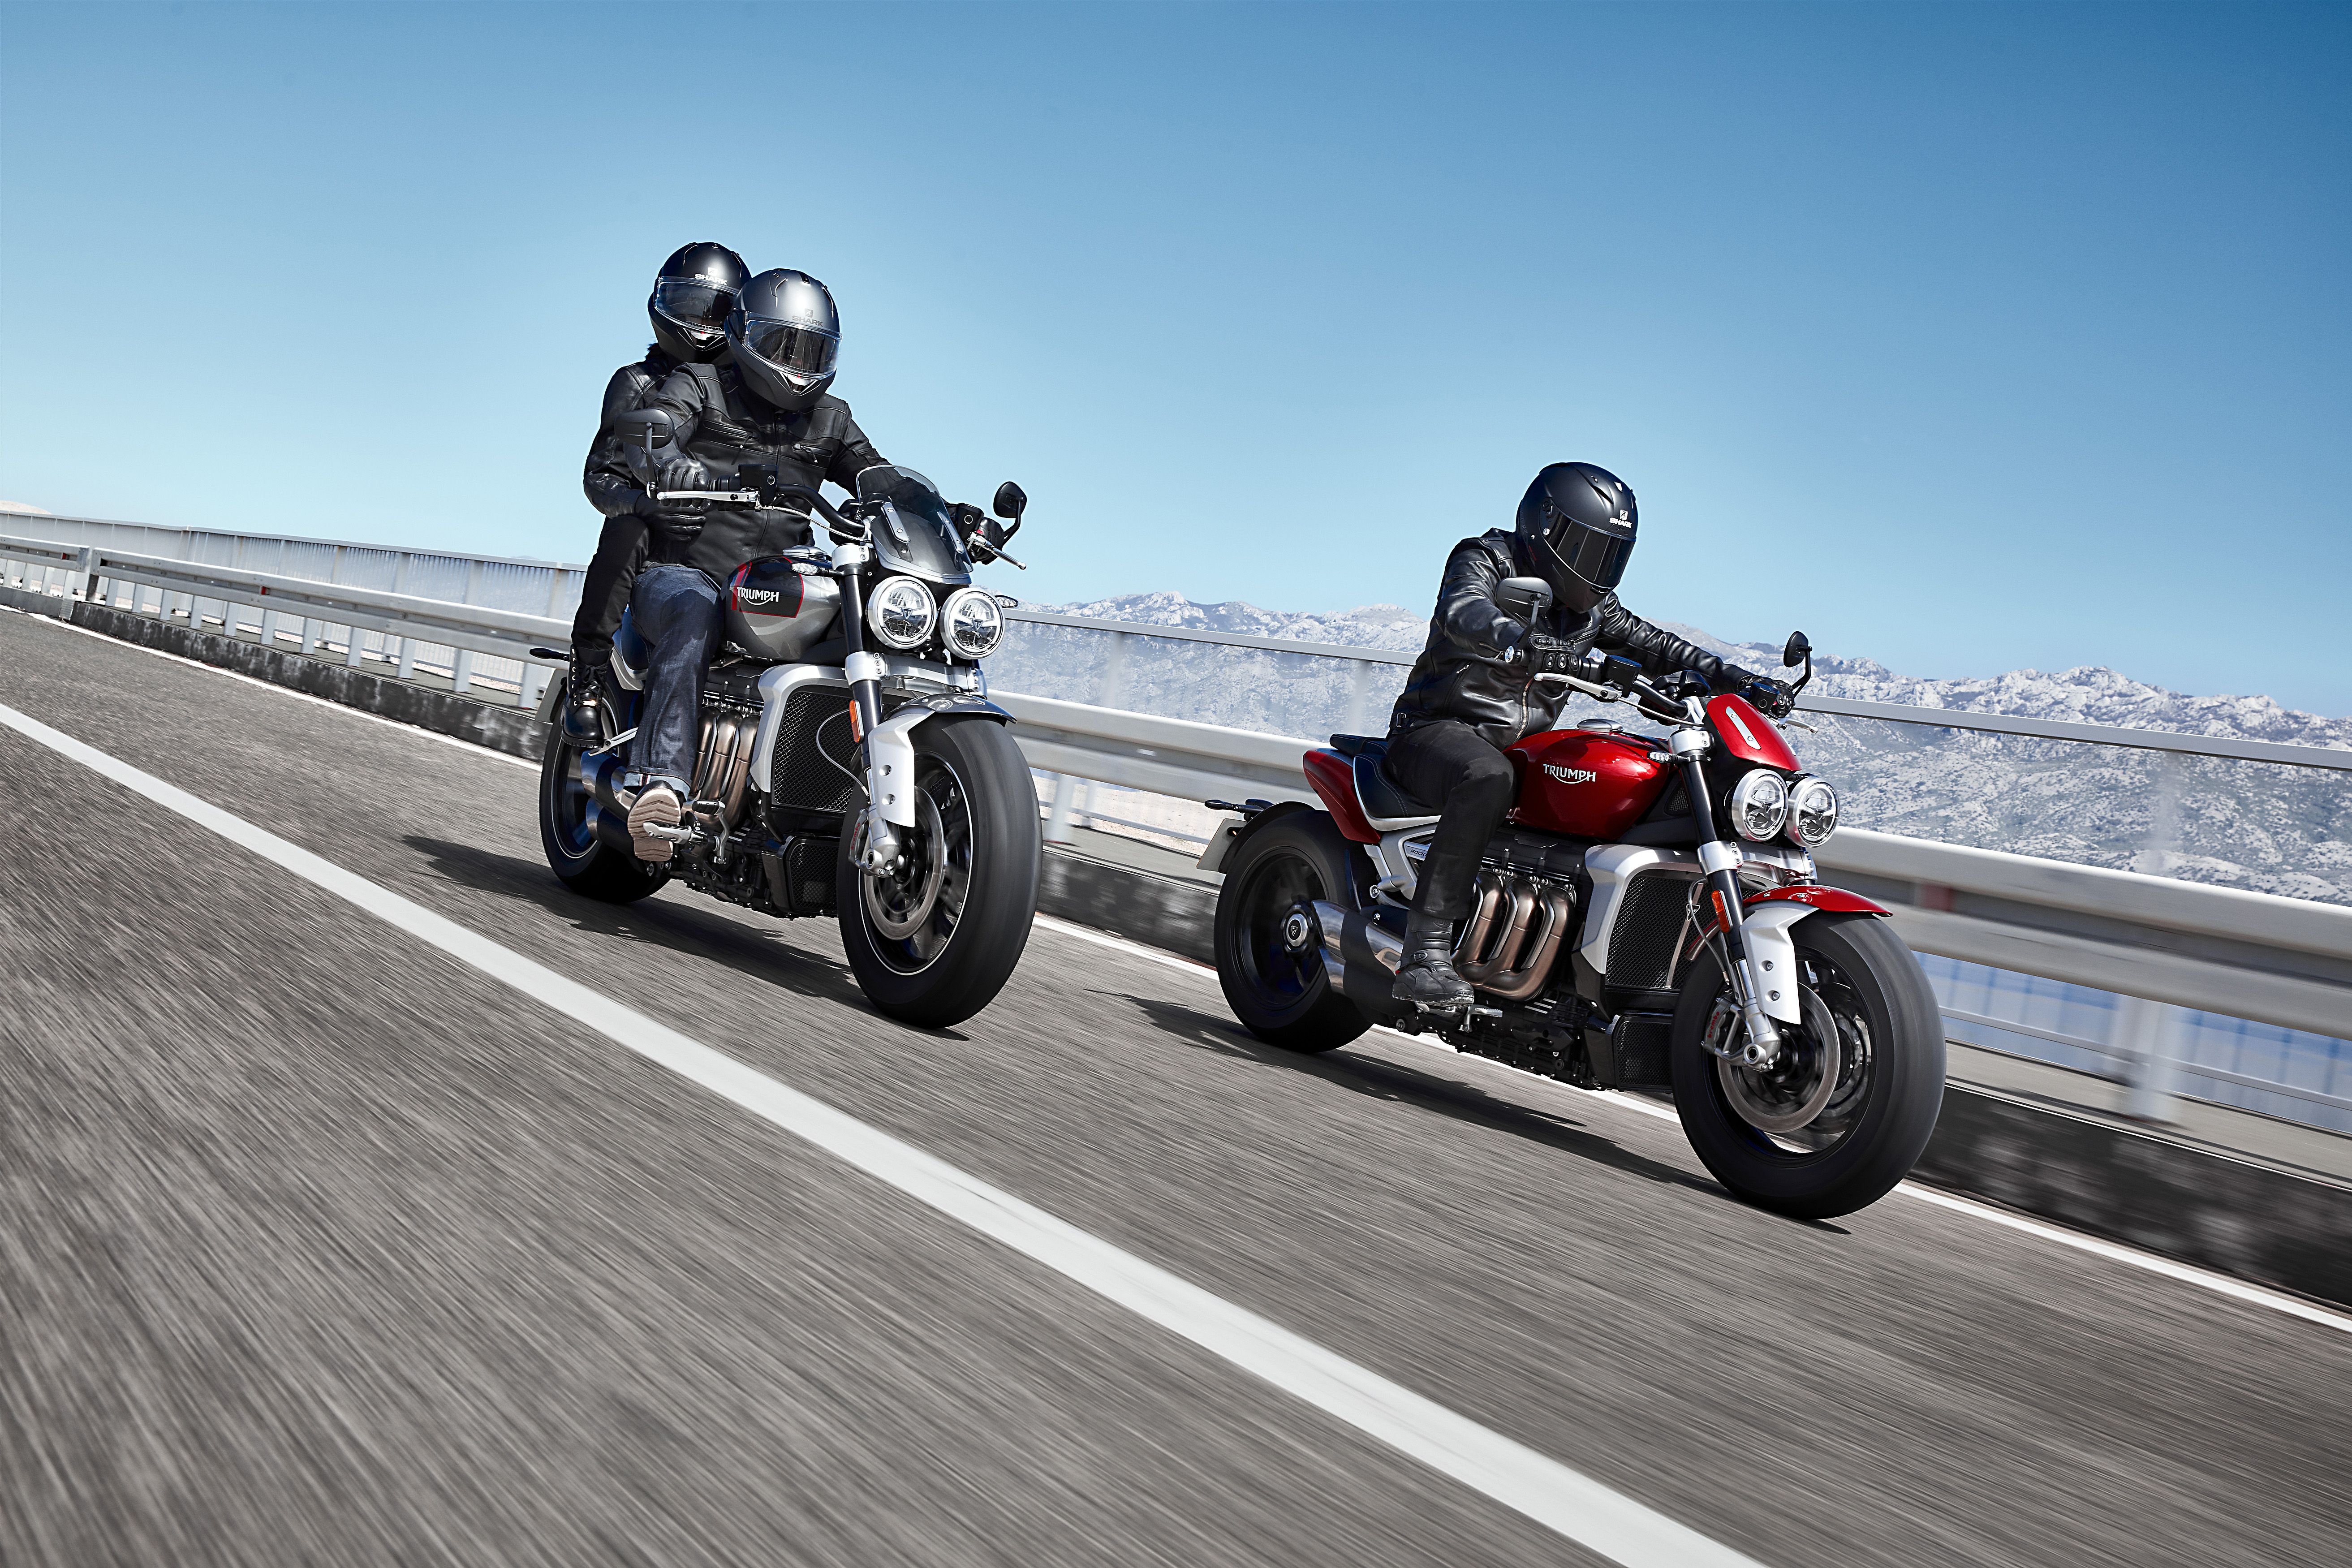 Eddike interferens fascisme The 10 Biggest Motorcycles You Can Buy